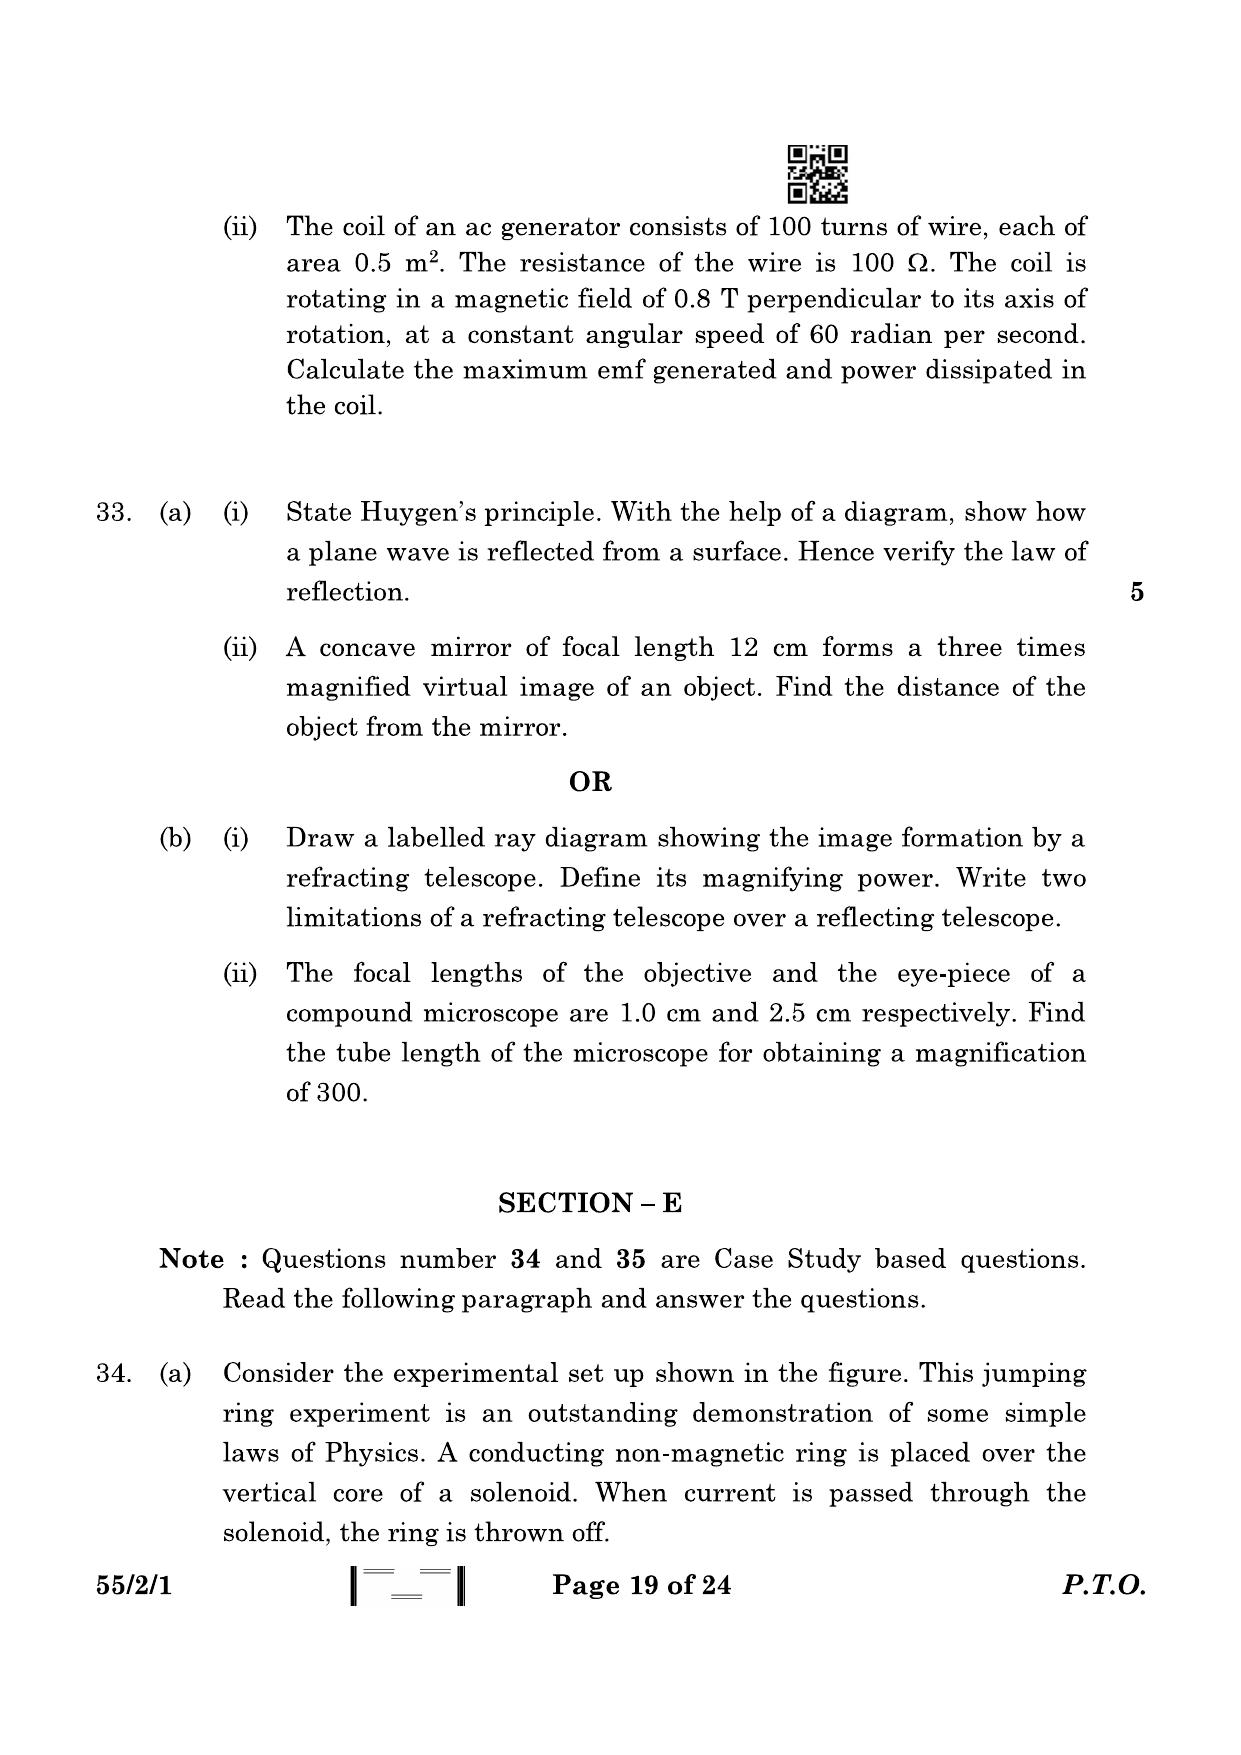 CBSE Class 12 55-2-1 Physics 2023 Question Paper - Page 19